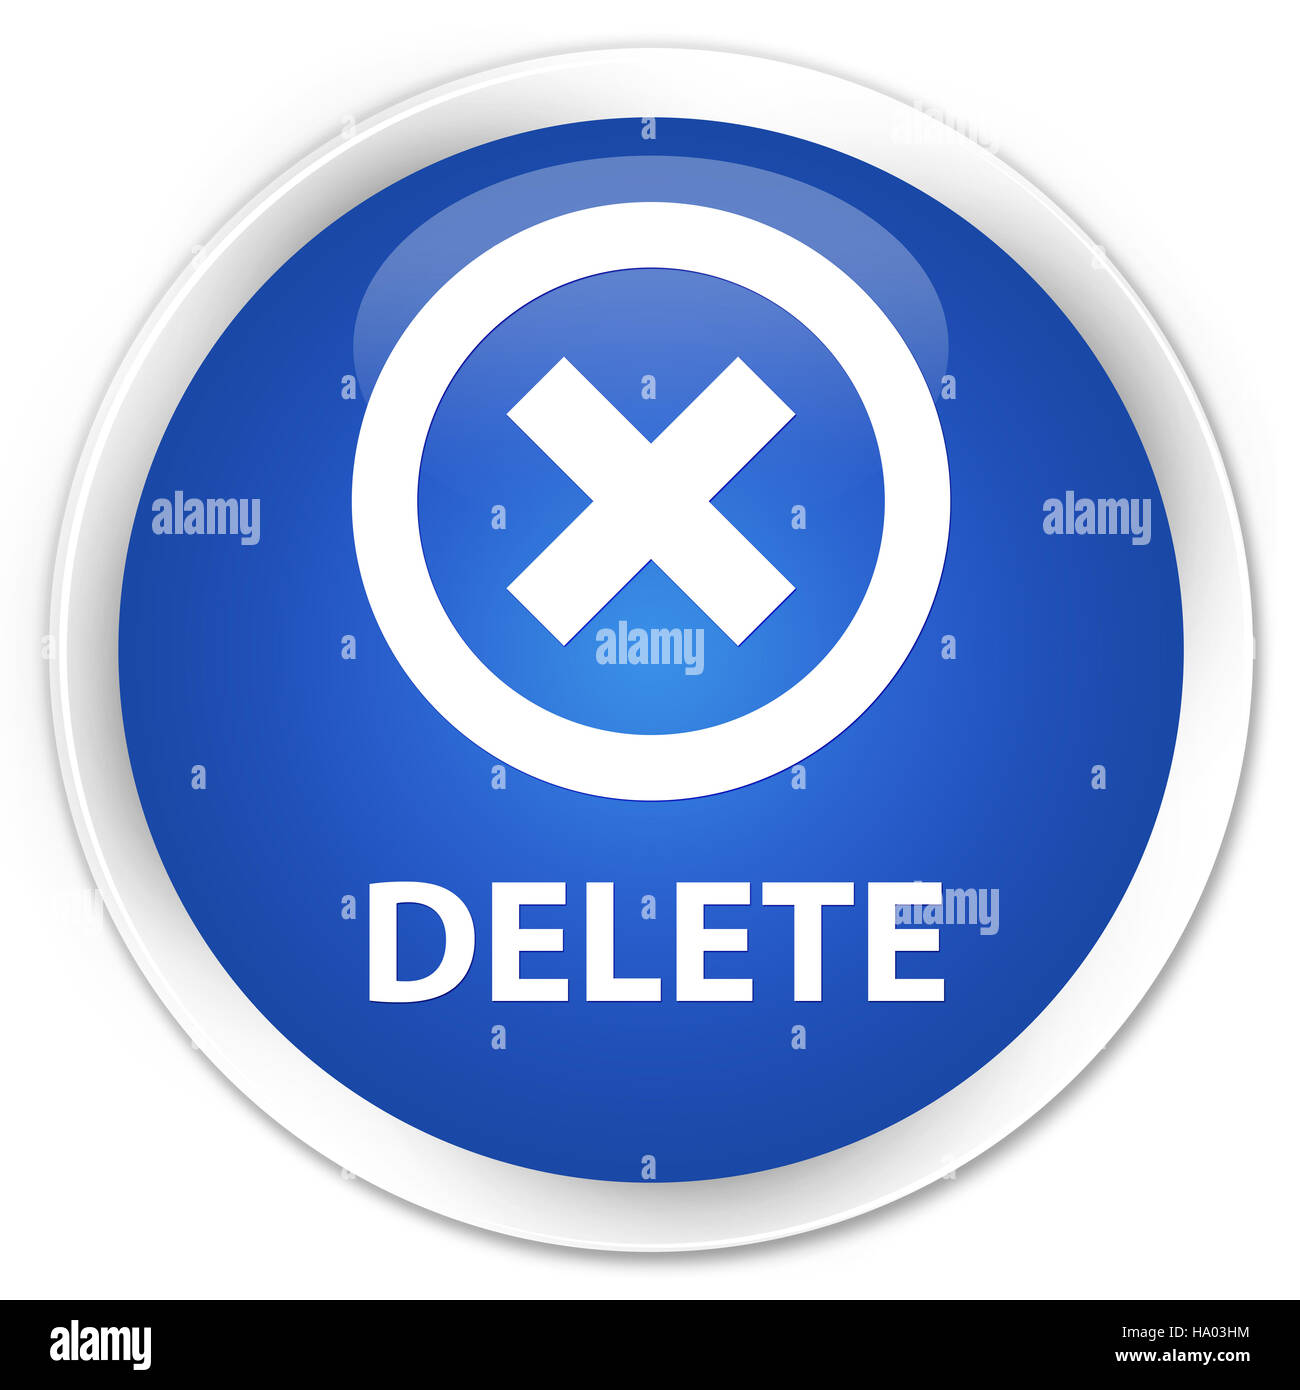 Delete isolated on premium blue round button abstract illustration Stock Photo